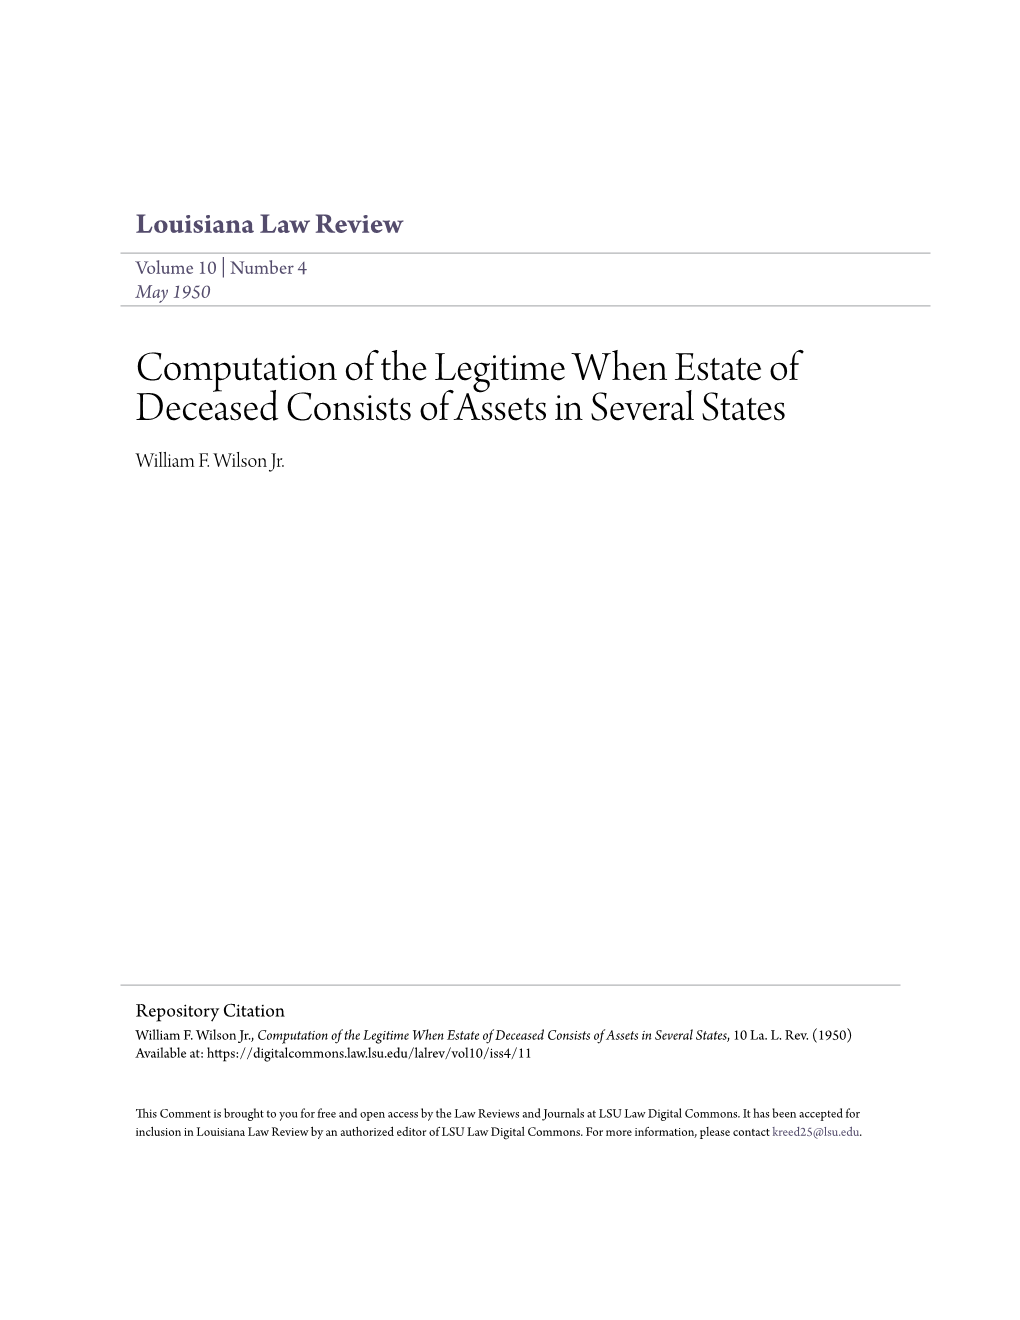 Computation of the Legitime When Estate of Deceased Consists of Assets in Several States William F